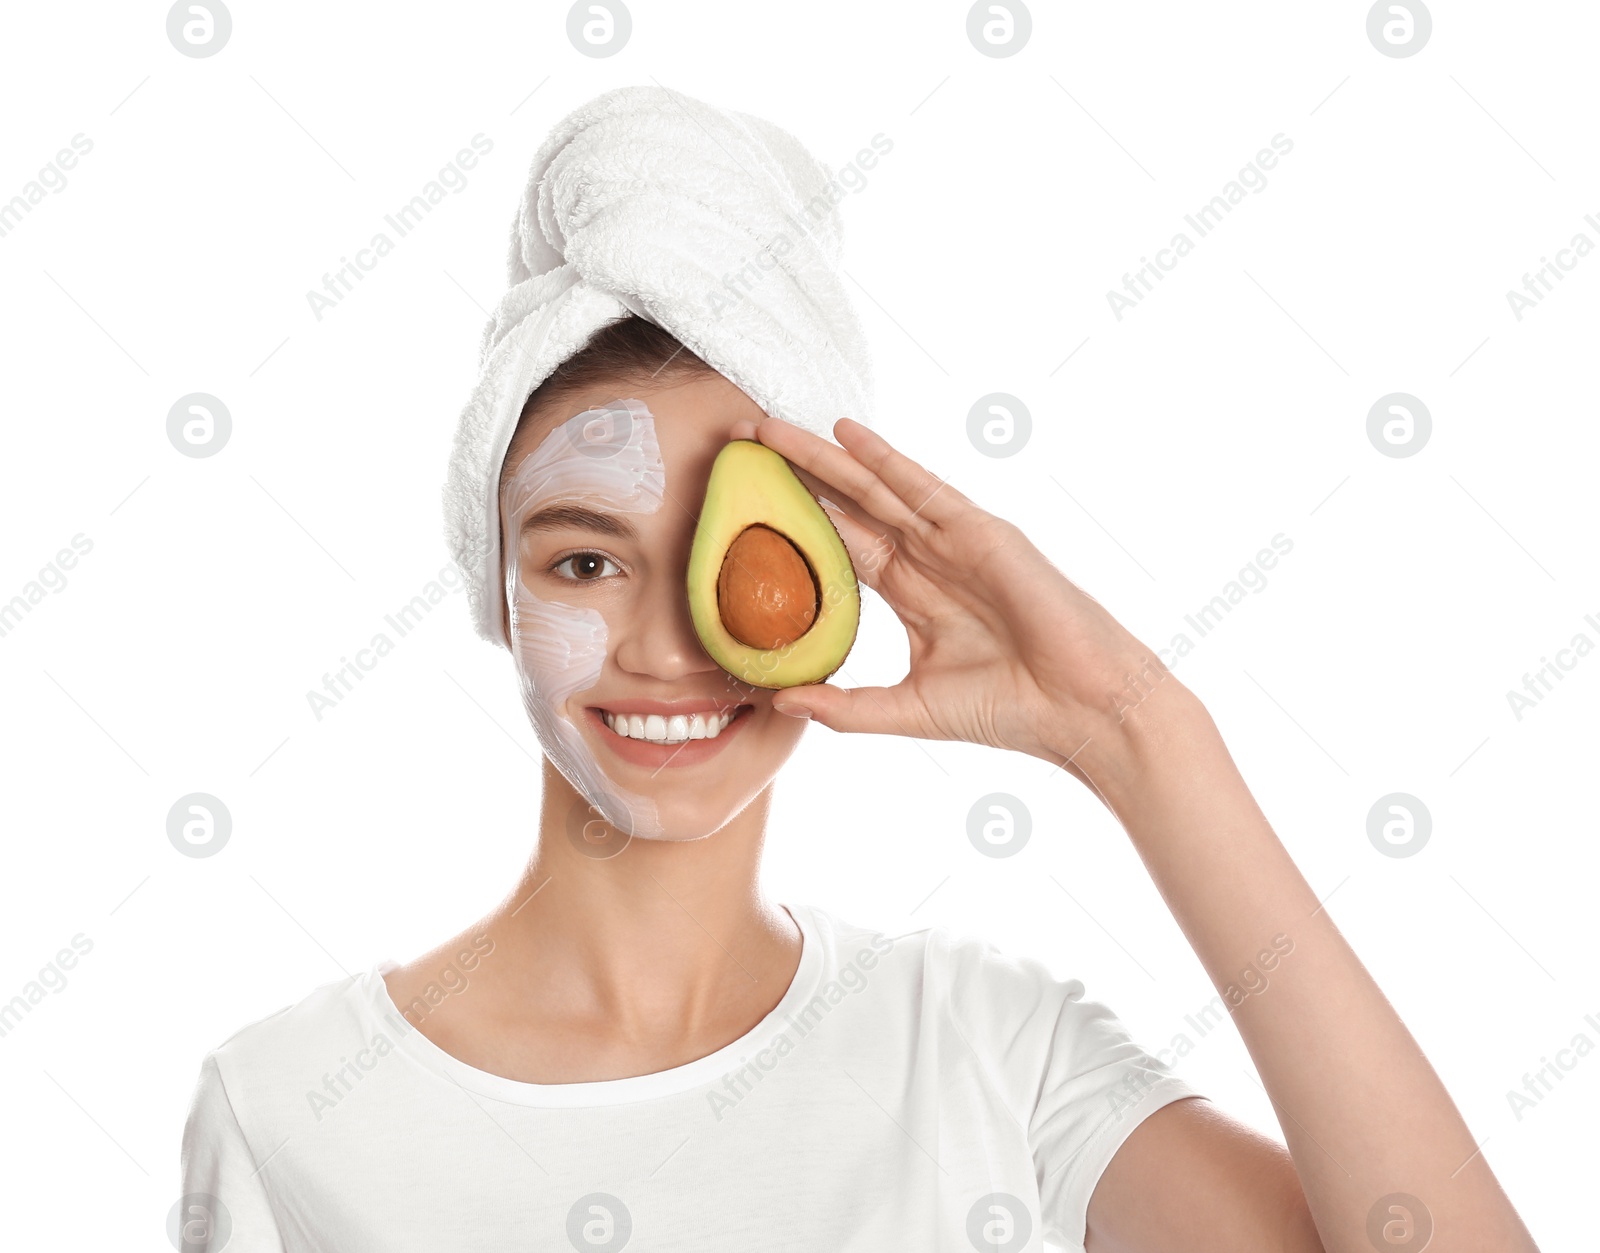 Photo of Happy young woman with organic mask on her face holding avocado against white background